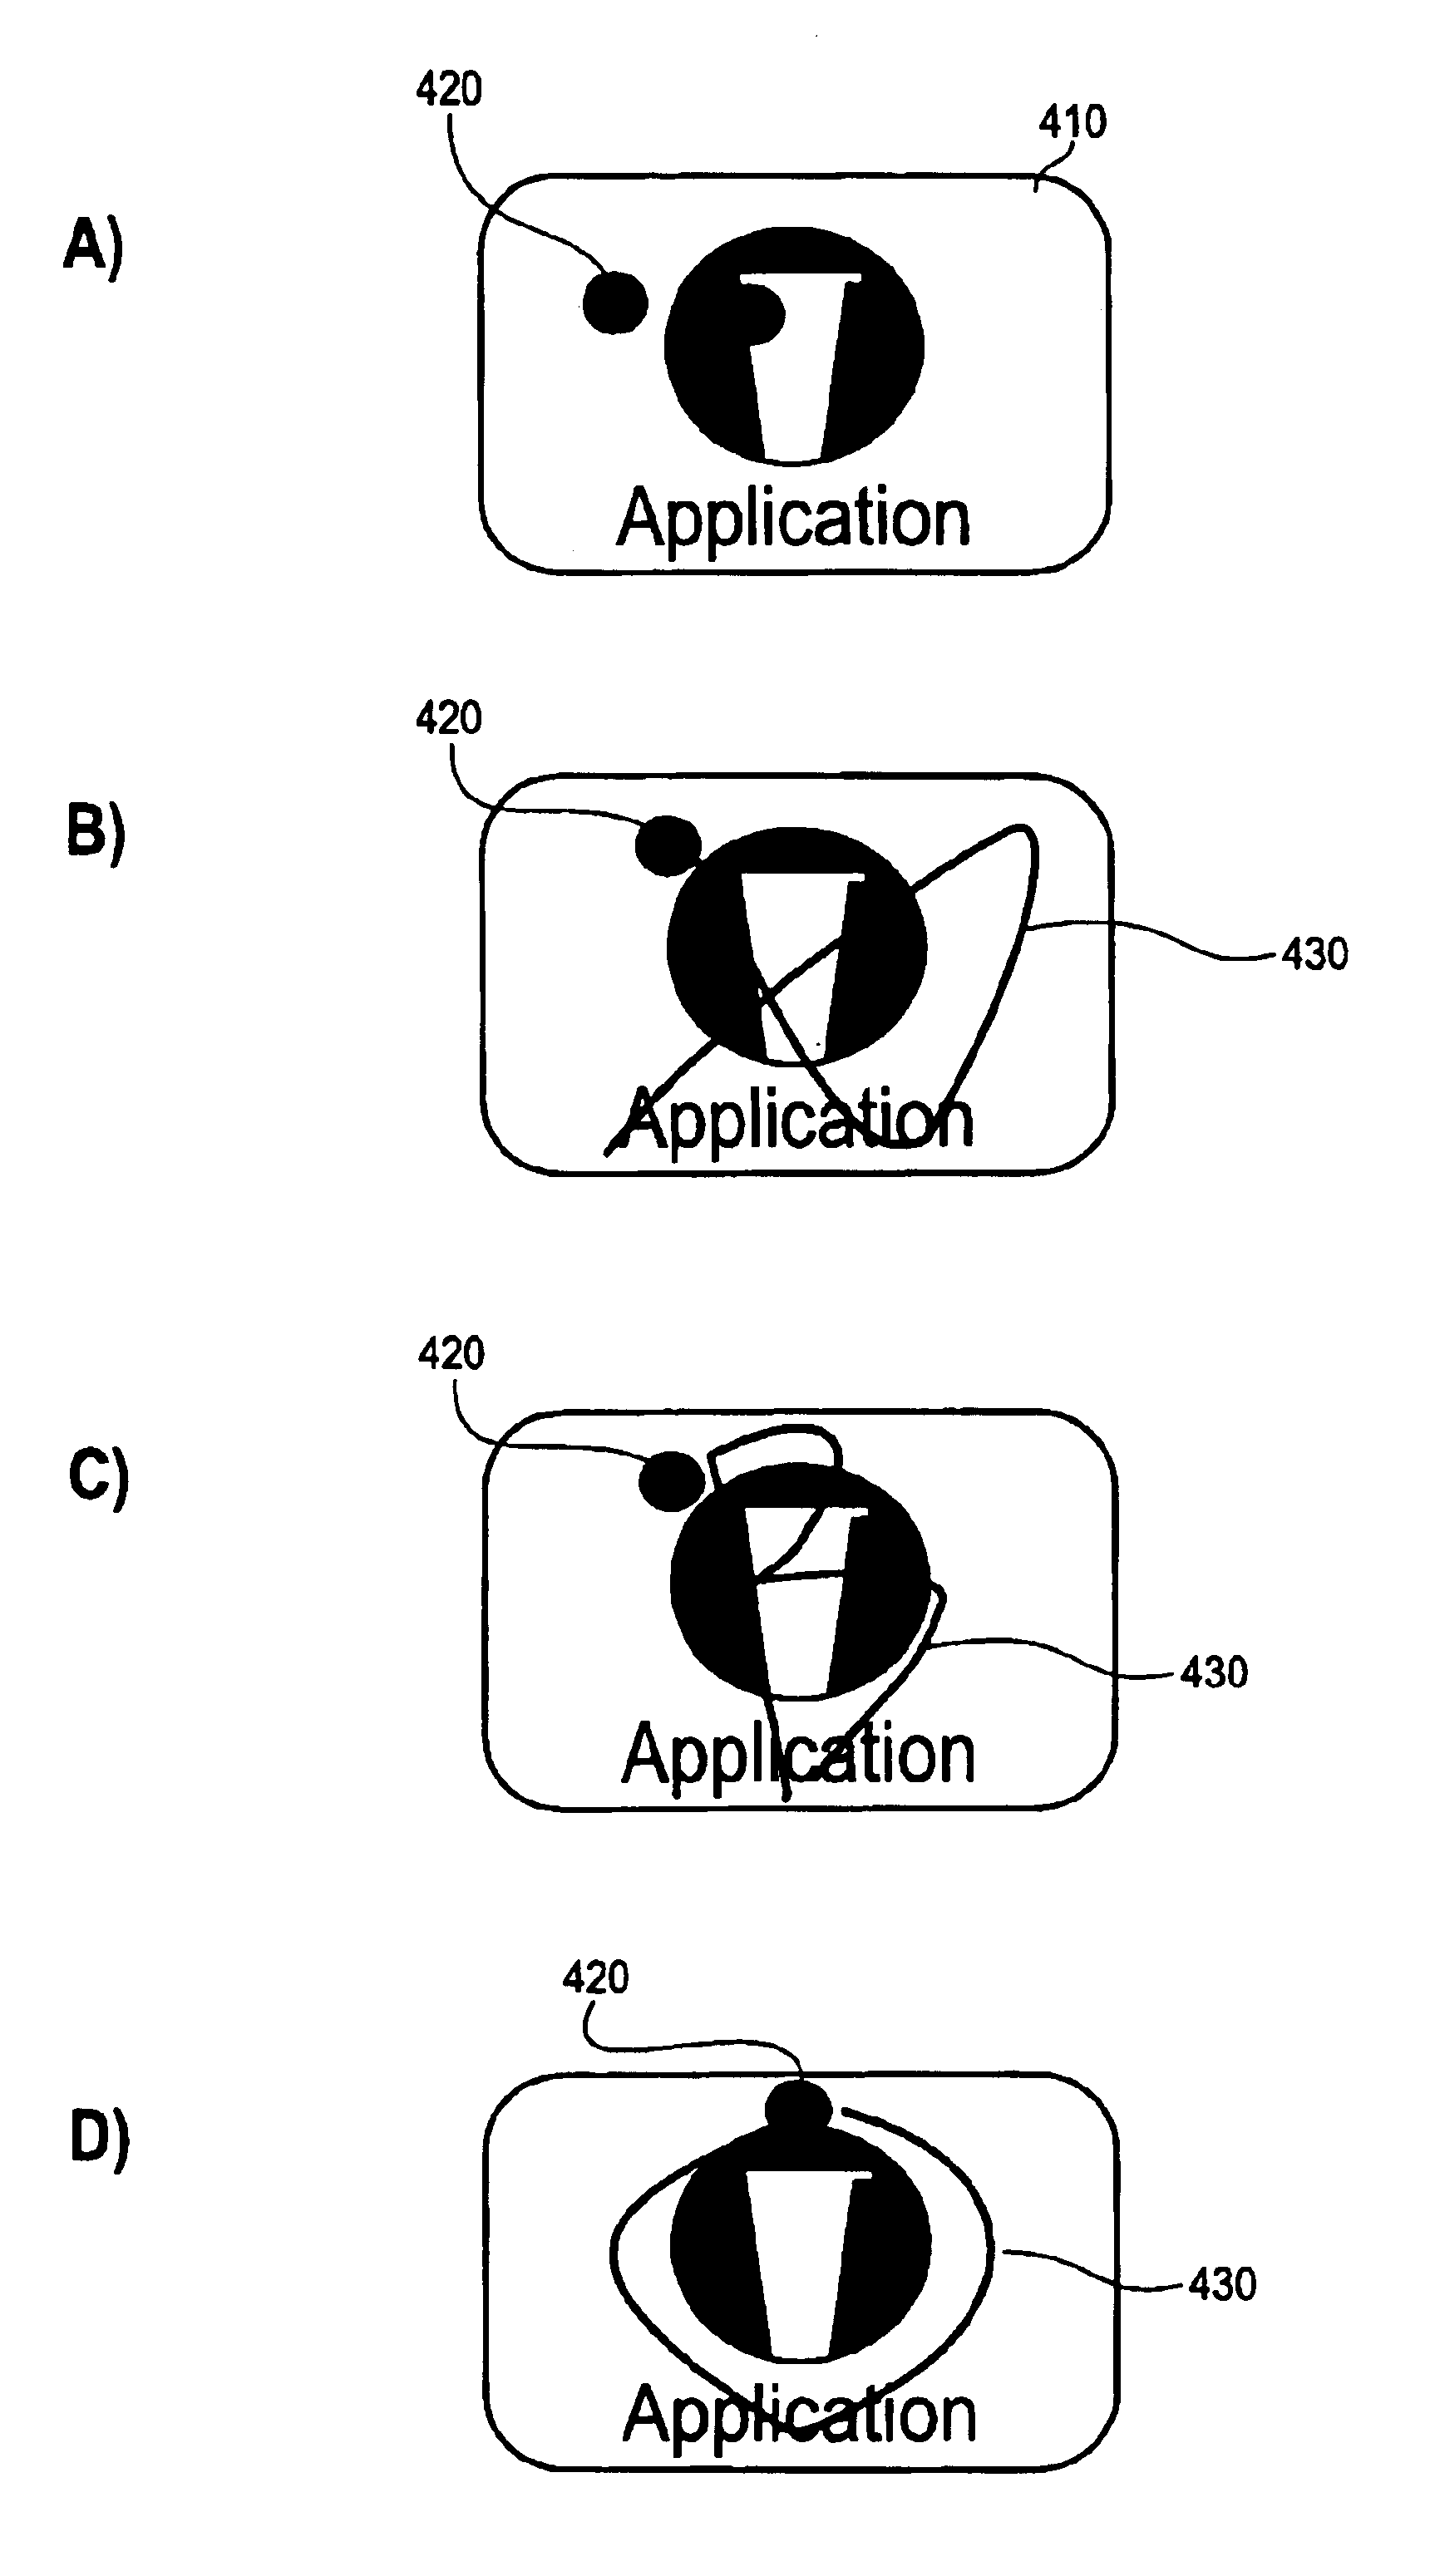 Method for controlling a handheld computer by entering commands onto a displayed feature of the handheld computer